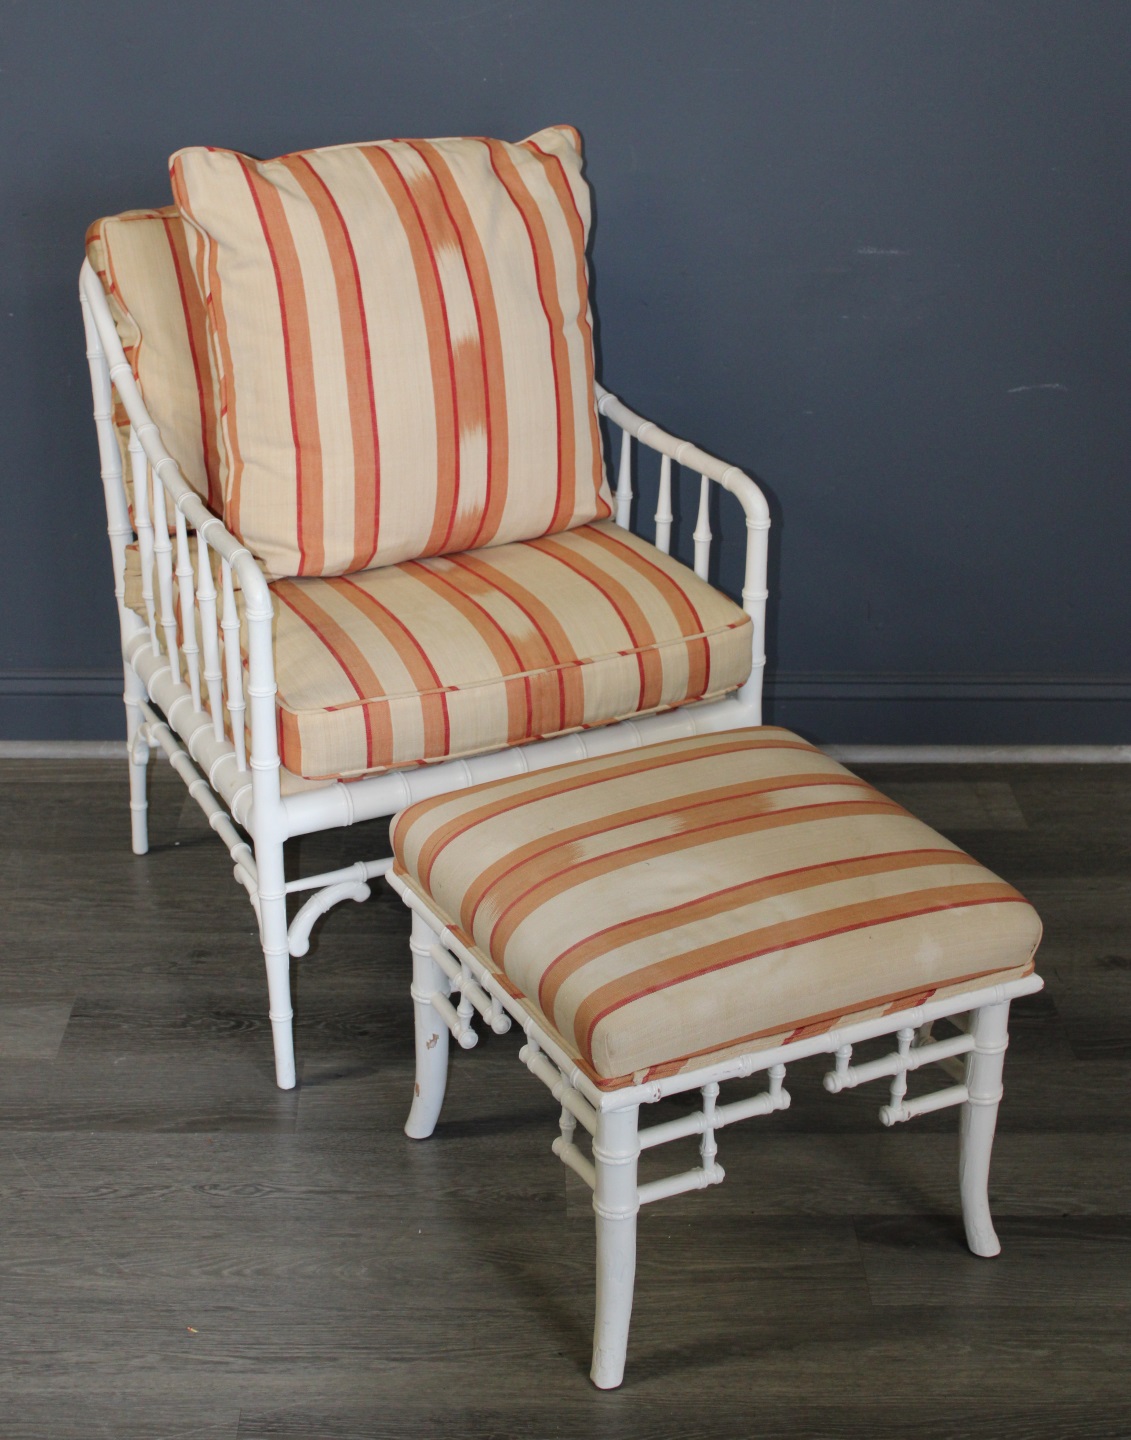 WHITE PAINTED BAMBOO FORM CHAIR 3bd39c